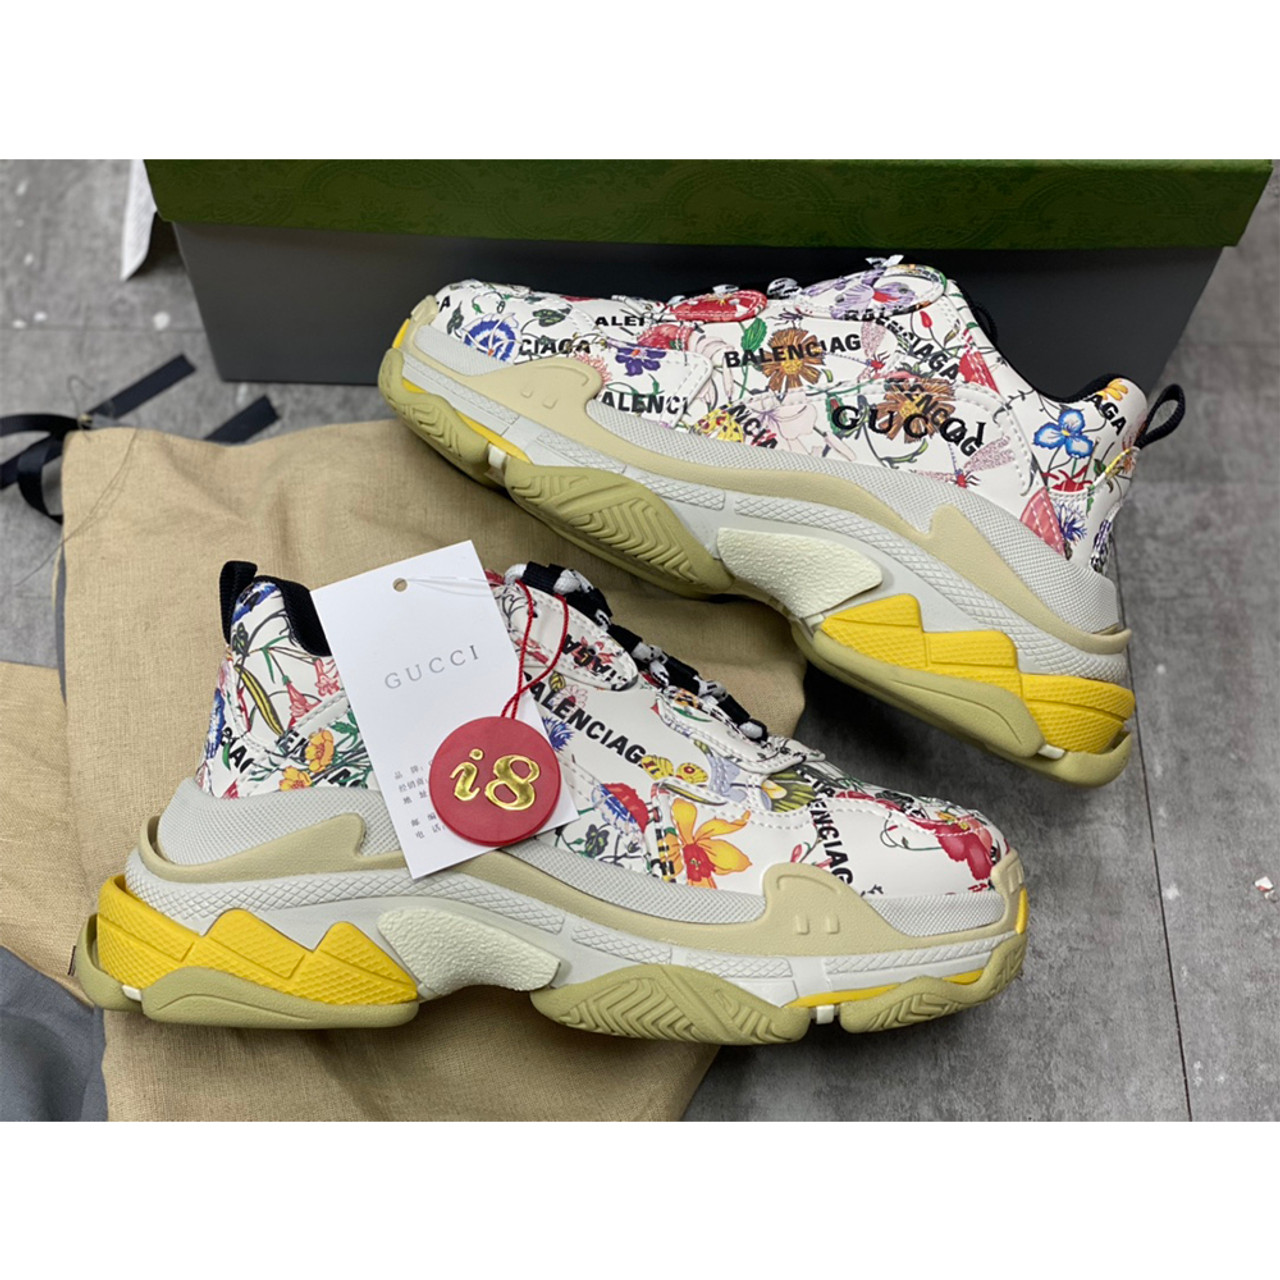 Wholesale Louis's Vuitton's Replica Lv's Balenciaga's Man Gucci's Designer  Nike's Jordan's 4 Factory in China Online Store Adidas's Shoes Yeezy  Branded Woman 3f - China Shoes and Branded Shoe price